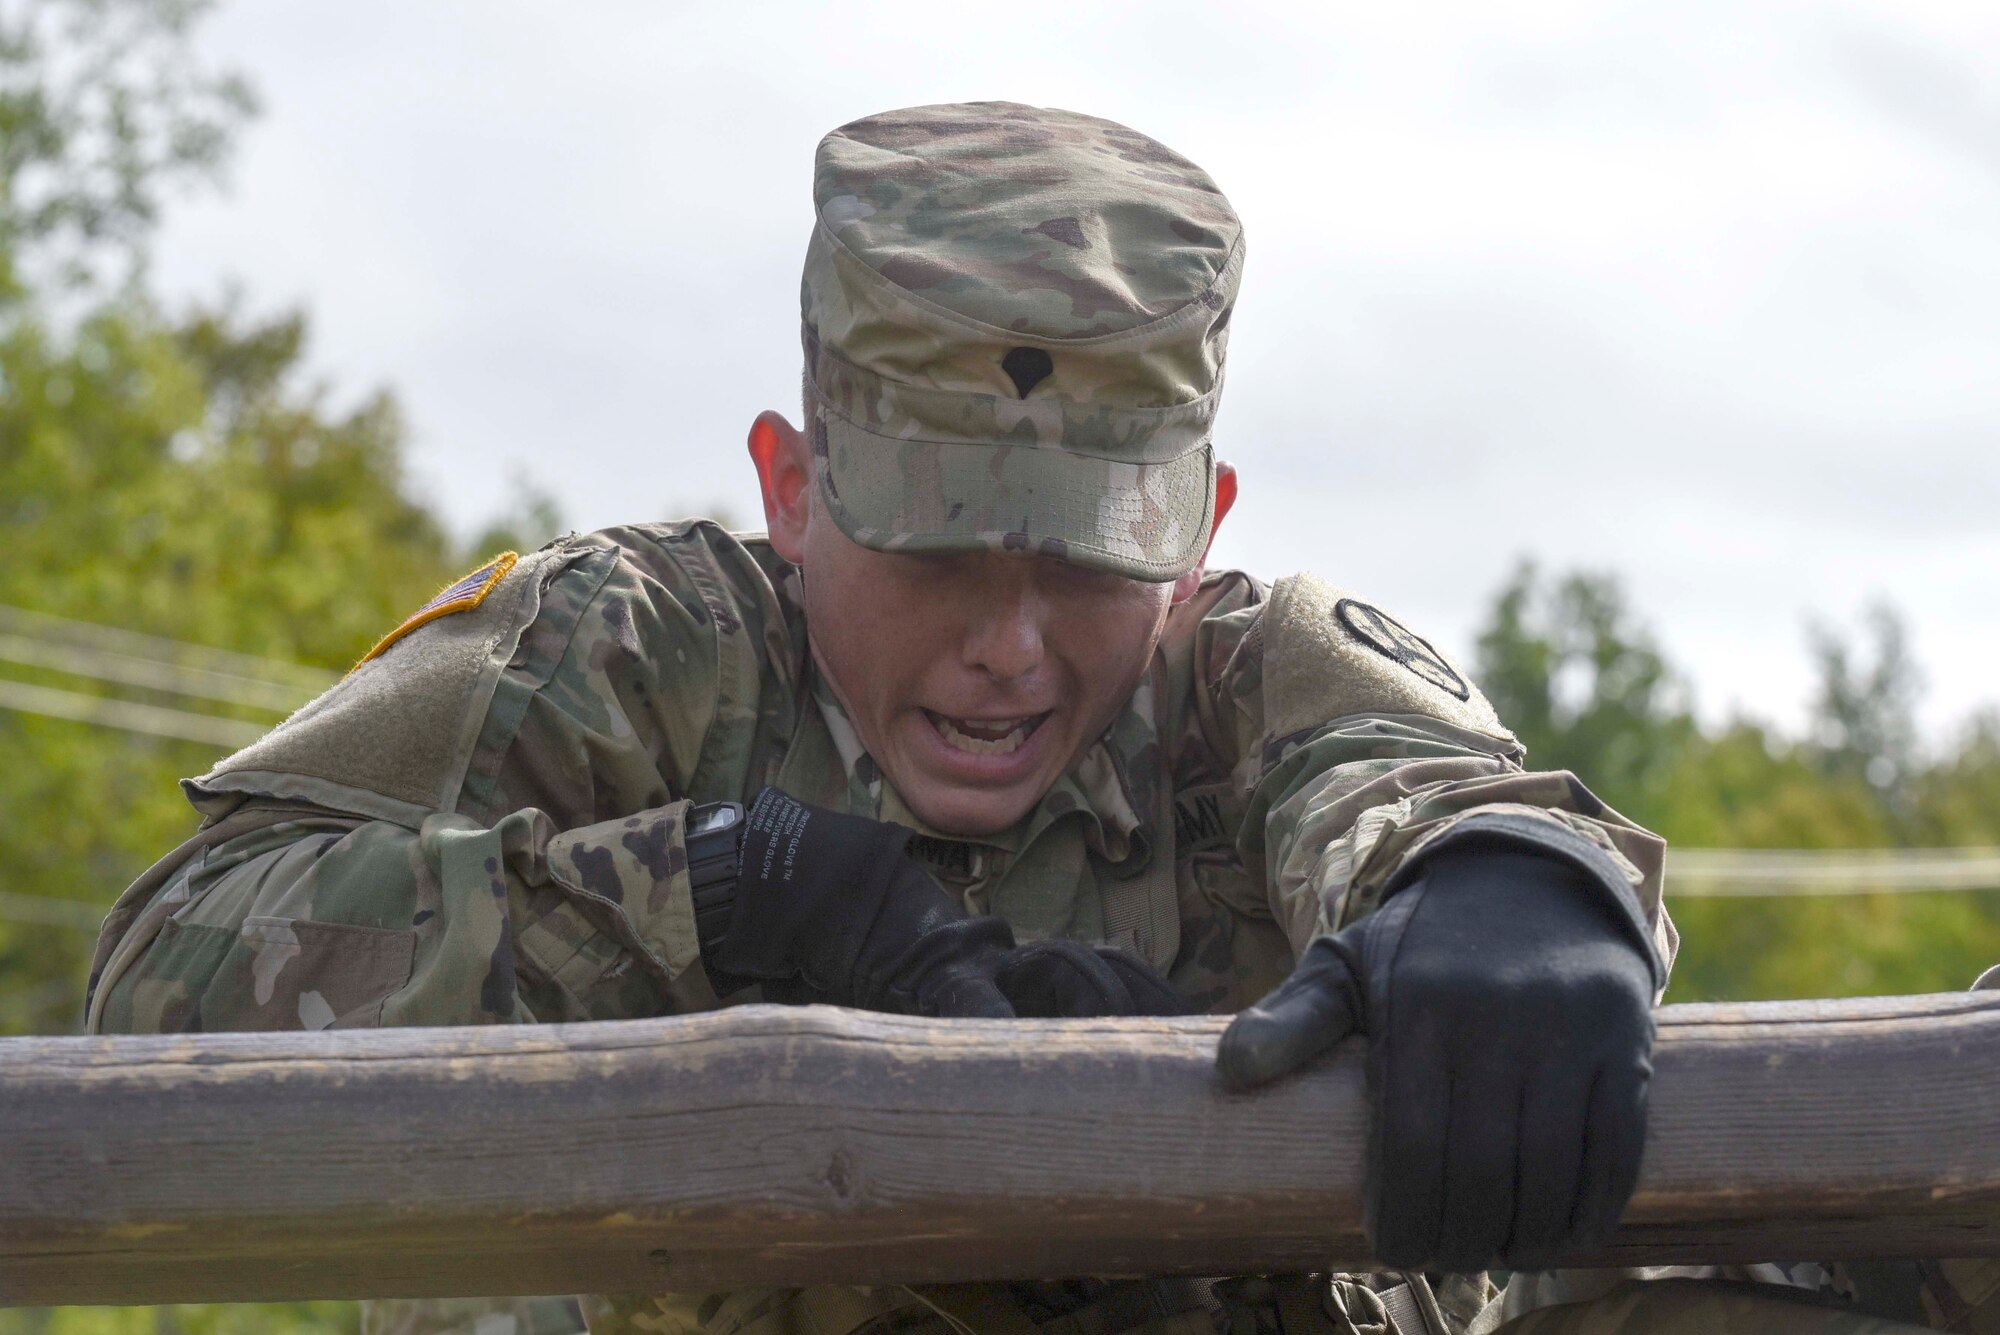 Specialist James Creasman, a Armor Vehicle Crewman with the 278th Armored Cavalry Regiment in Knoxville, pulls himself over an obstacle while preparing for the march and shoot section of the Worthington Challenge. The Worthington Challenge is an internatoinal armored crew competition, hosted by the Canadian Army, focused on showing armed crew skills as well as sharing best training practices amongst allies.(US Air Force photo by Senior Airman Leon Bussey / Released)